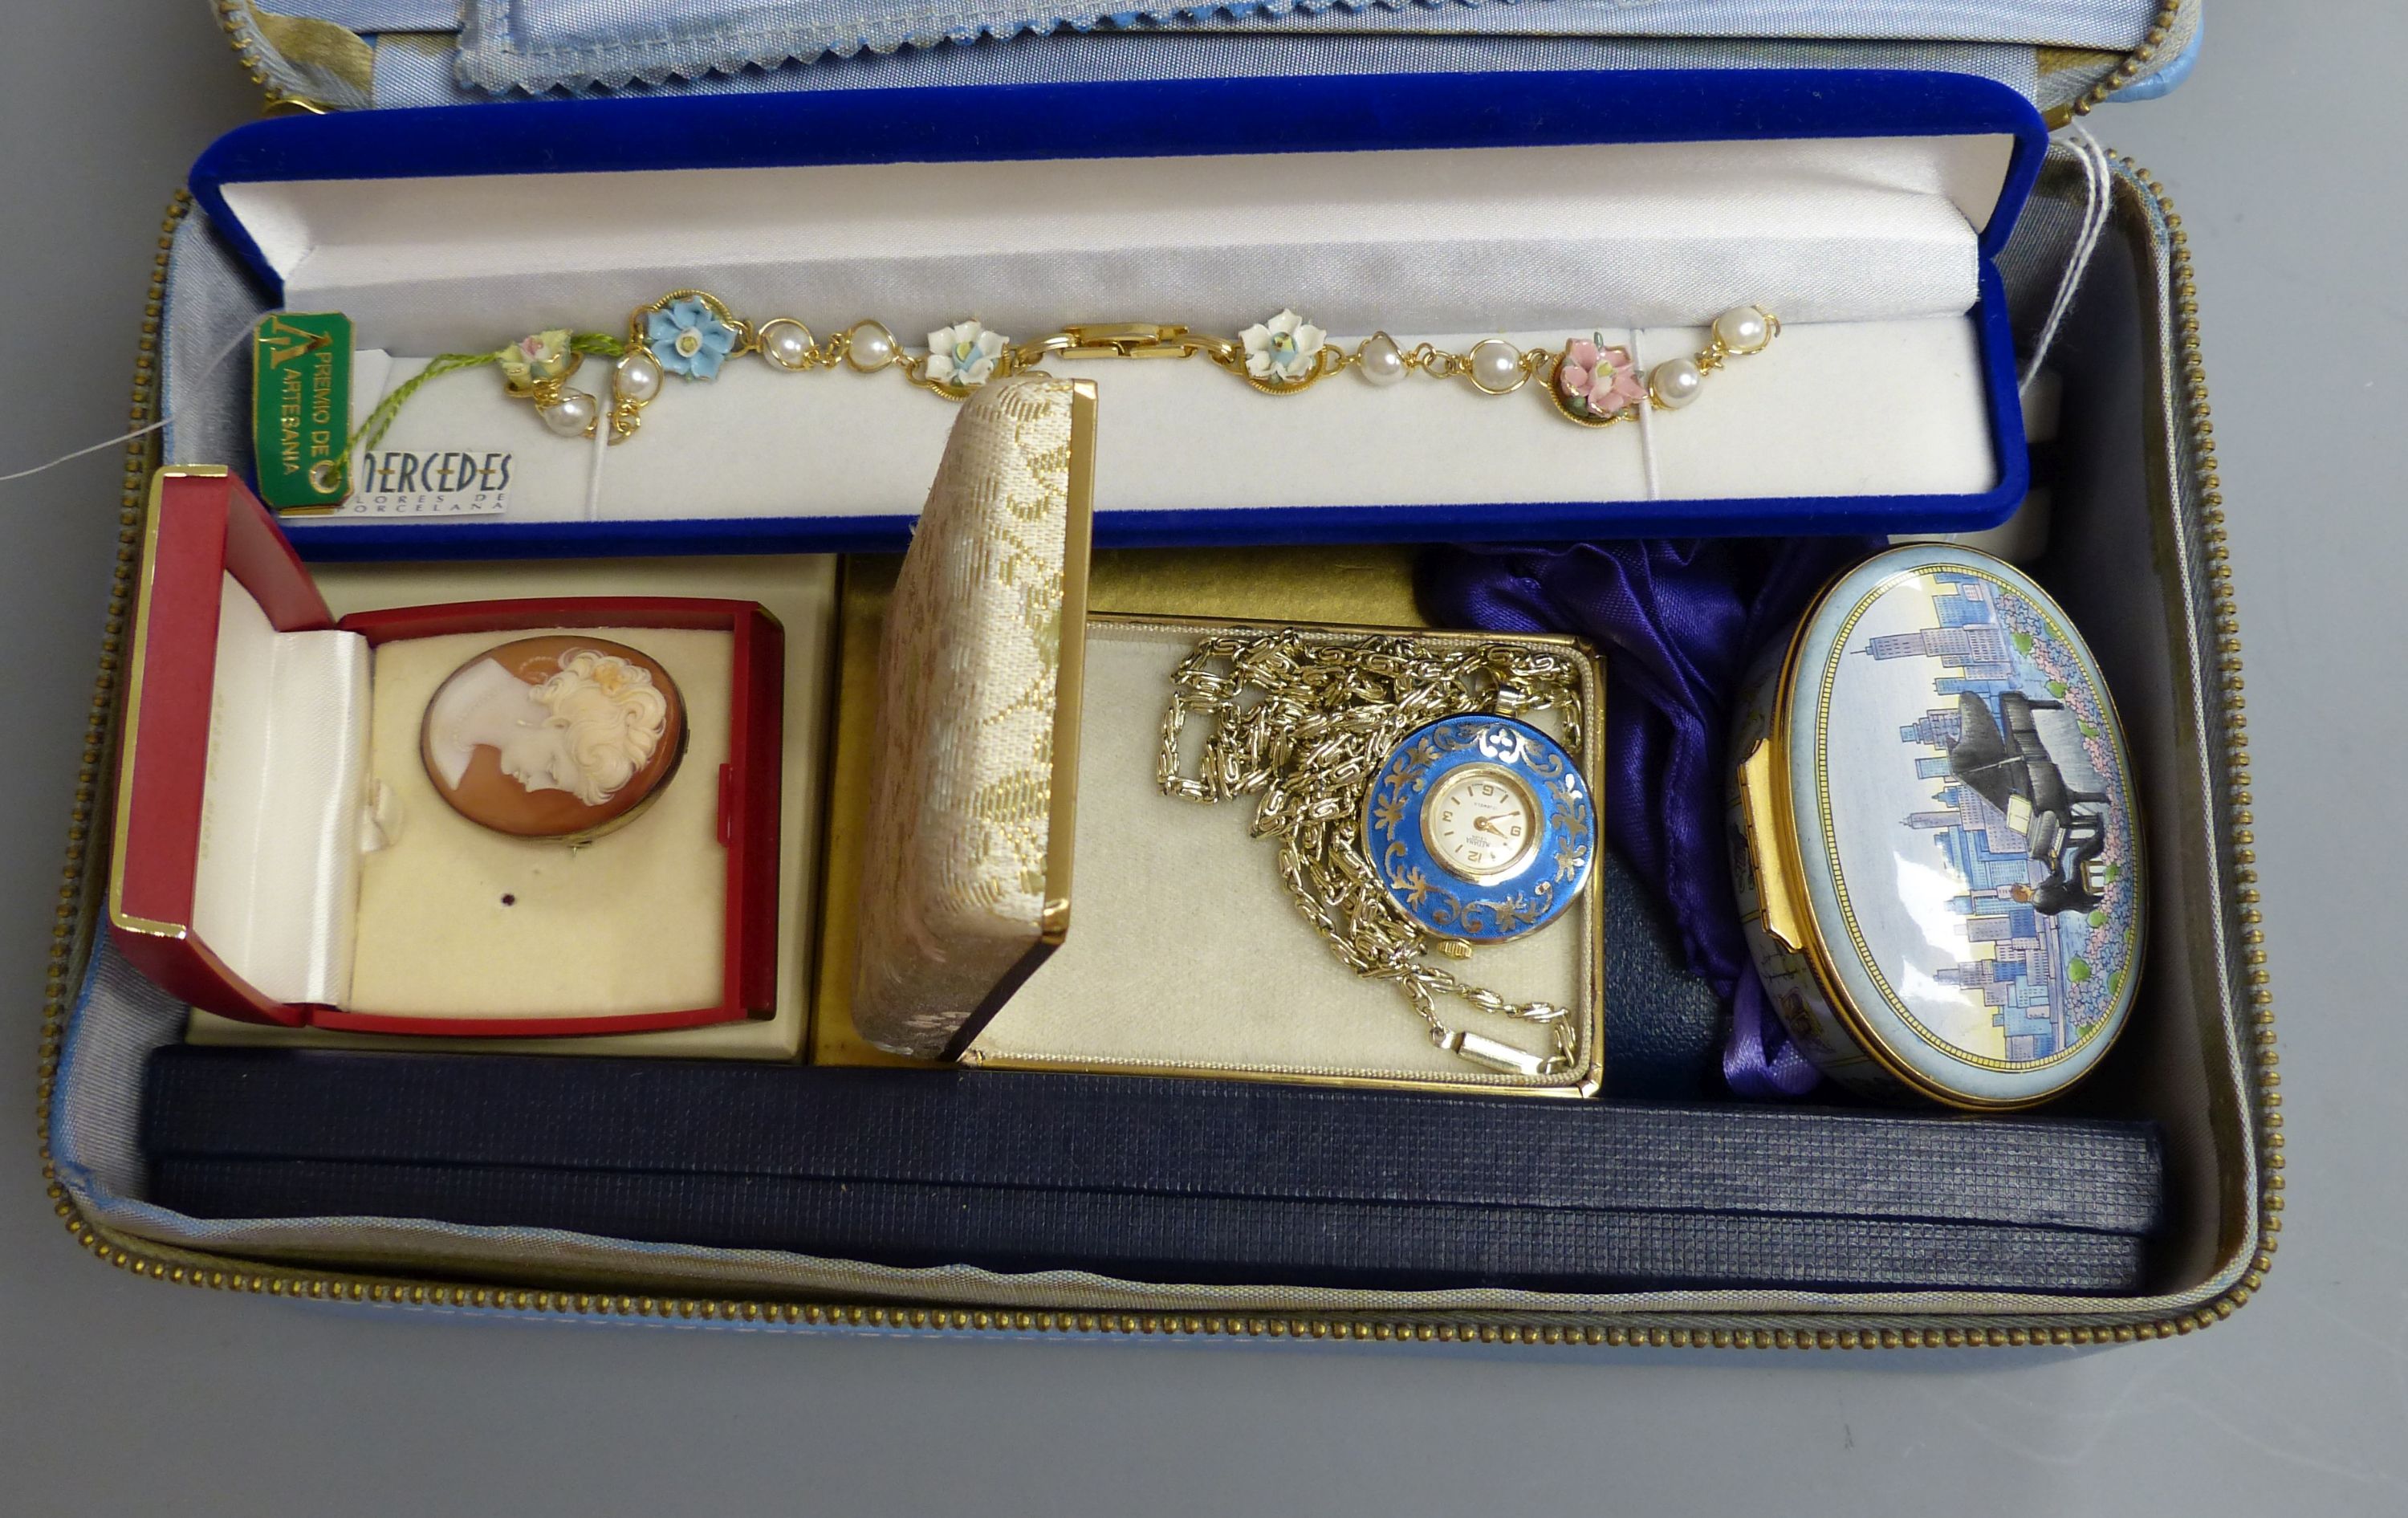 A Halcyon Days Gershwin 'Rhapsody in Blue' music box, no. 339/750, an engine-turned silver compact, three various watches and costume jewellery